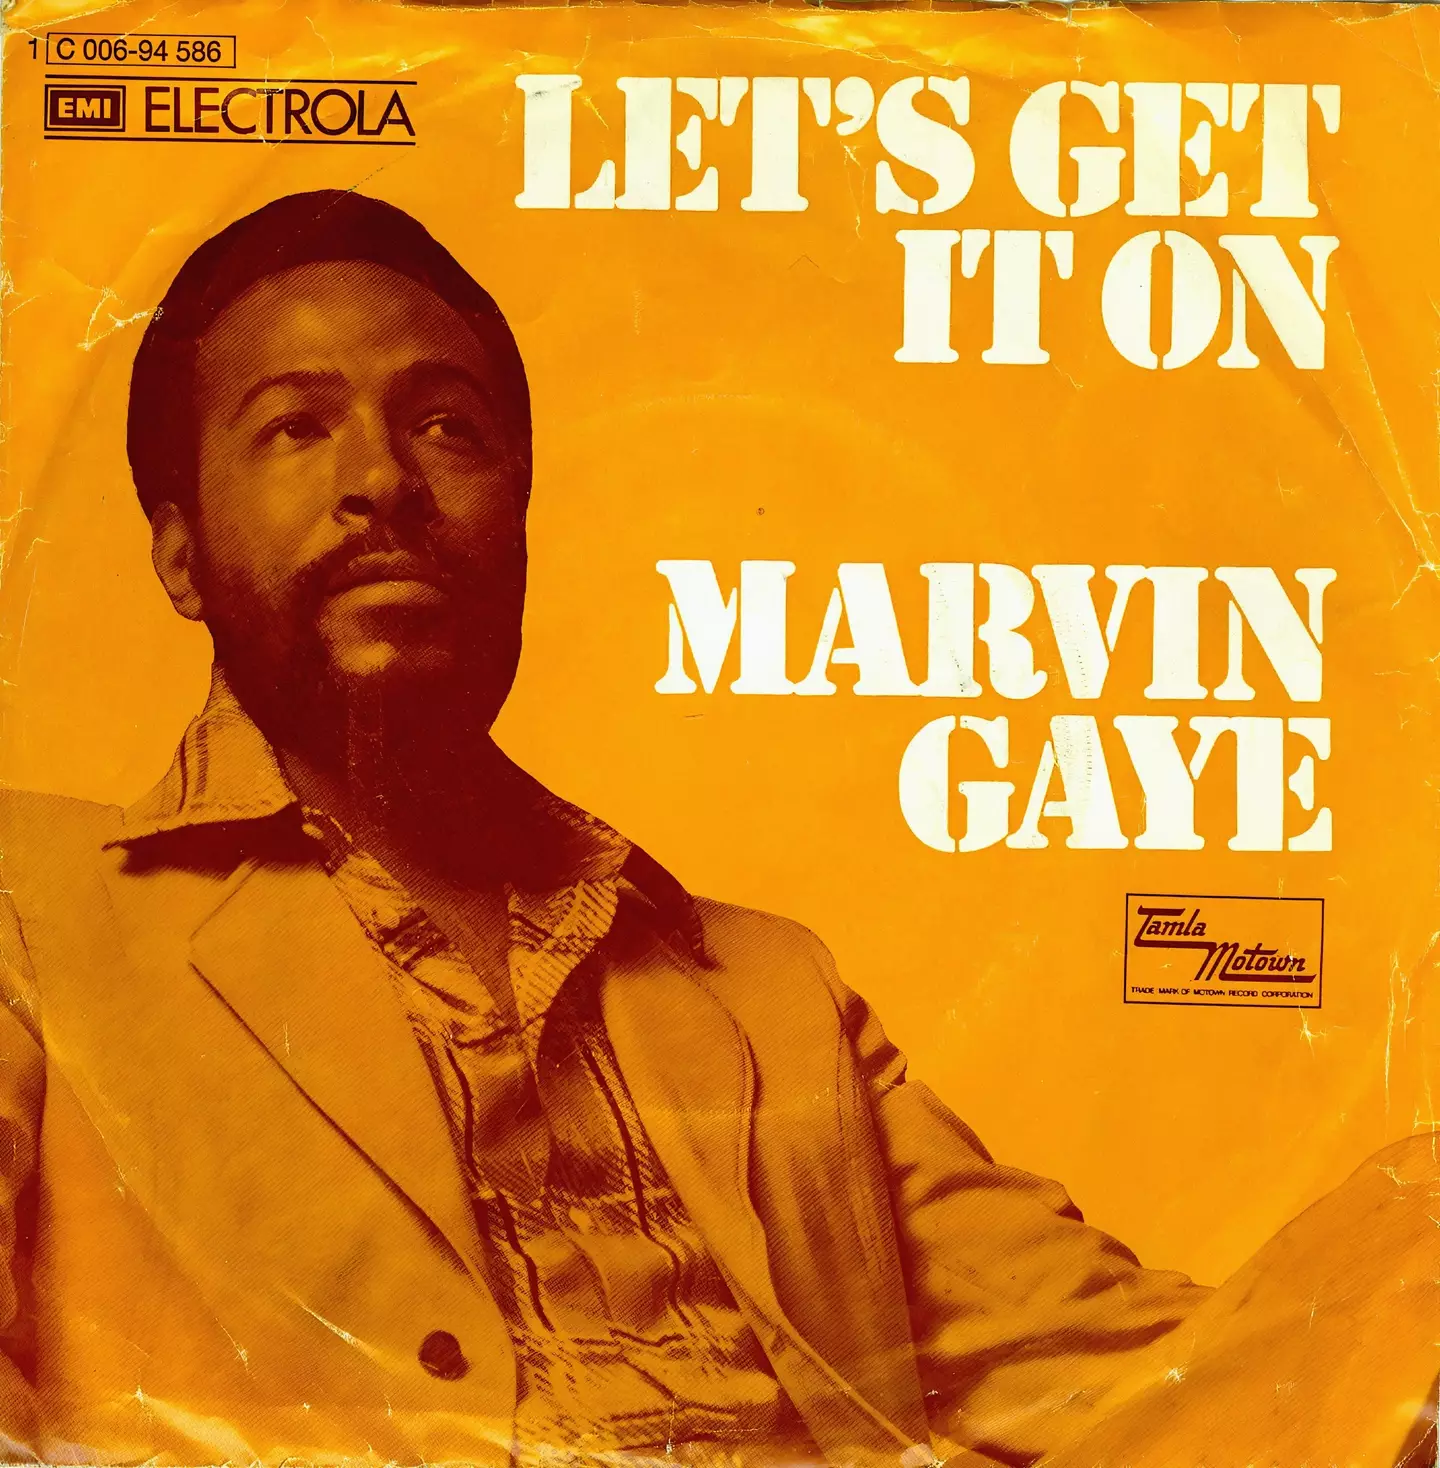 The plaintiff alleges that the singer lifted ‘Thinking Out Loud’ from Marvin Gaye’s ‘Let’s Get It On’.